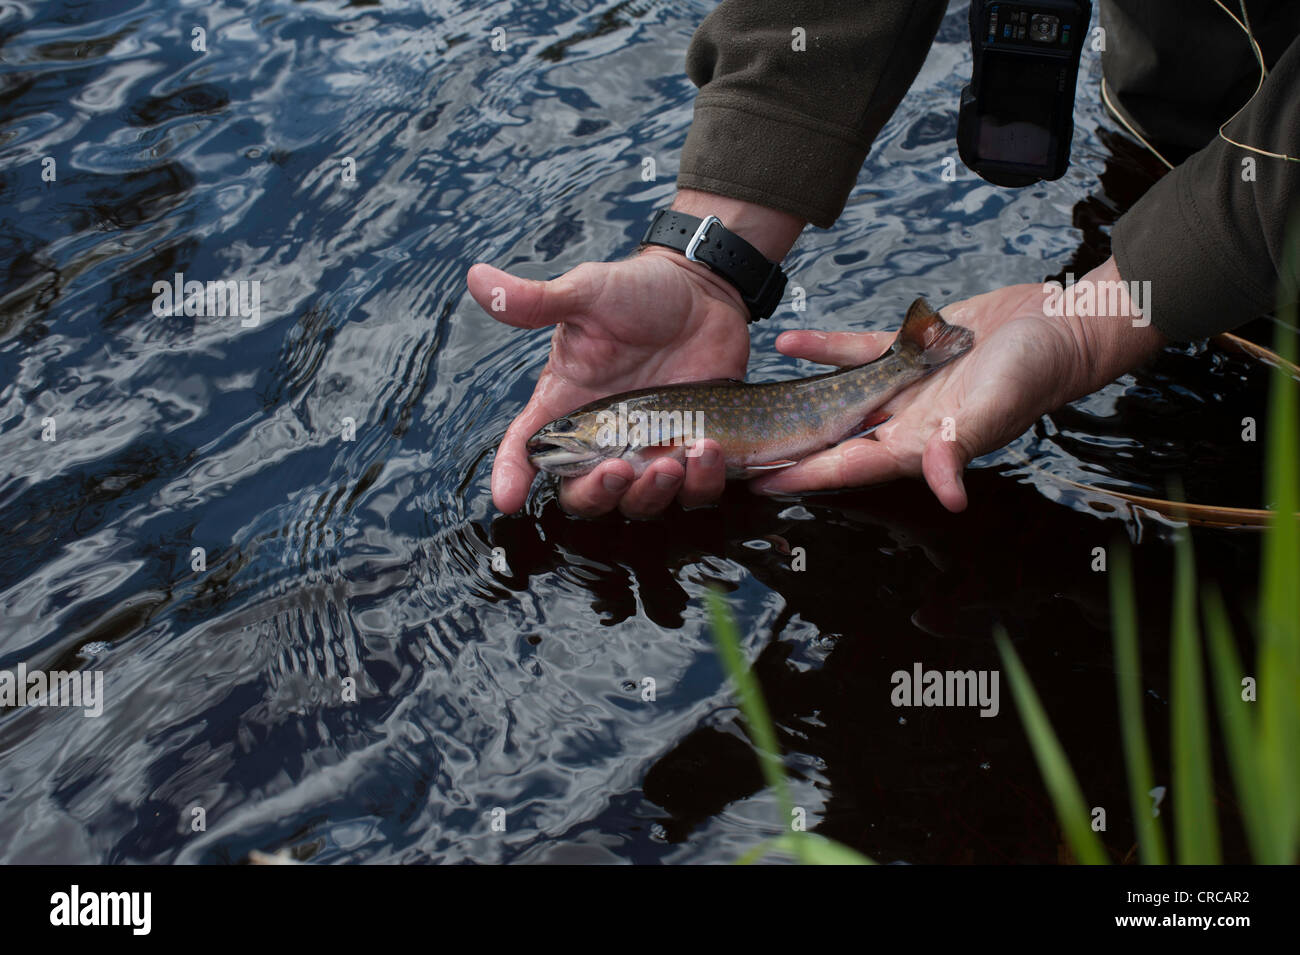 Fly fisherman displays the vivid colors of this Wisconsin brook trout before releasing it back into the stream. Stock Photo